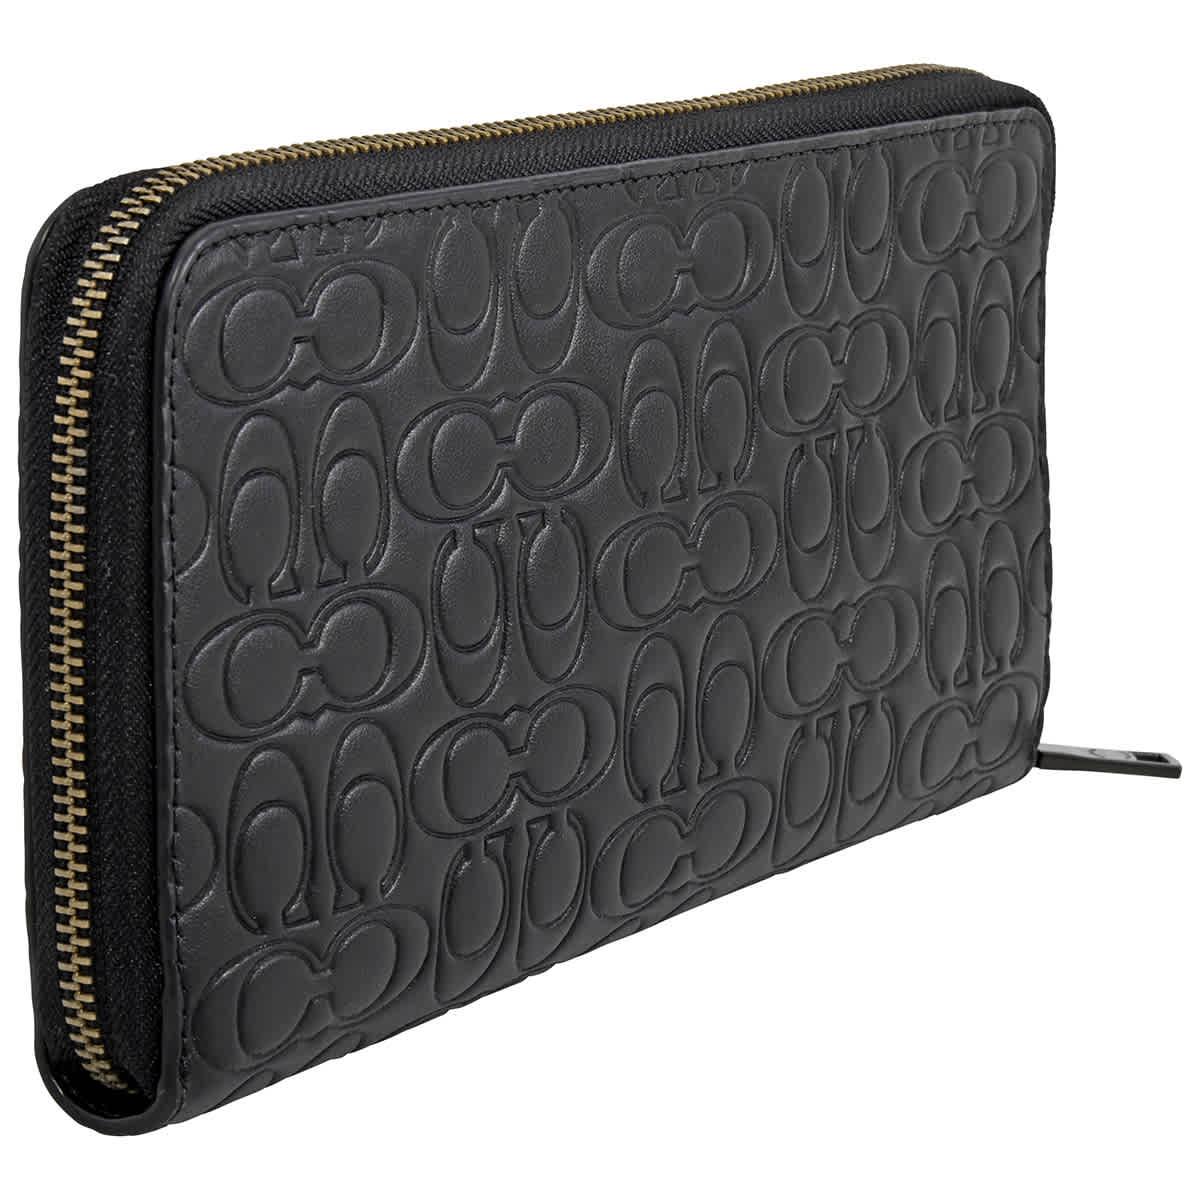 Latest Coach Wallets & Card Holders arrivals - Men - 5 products |  FASHIOLA.in